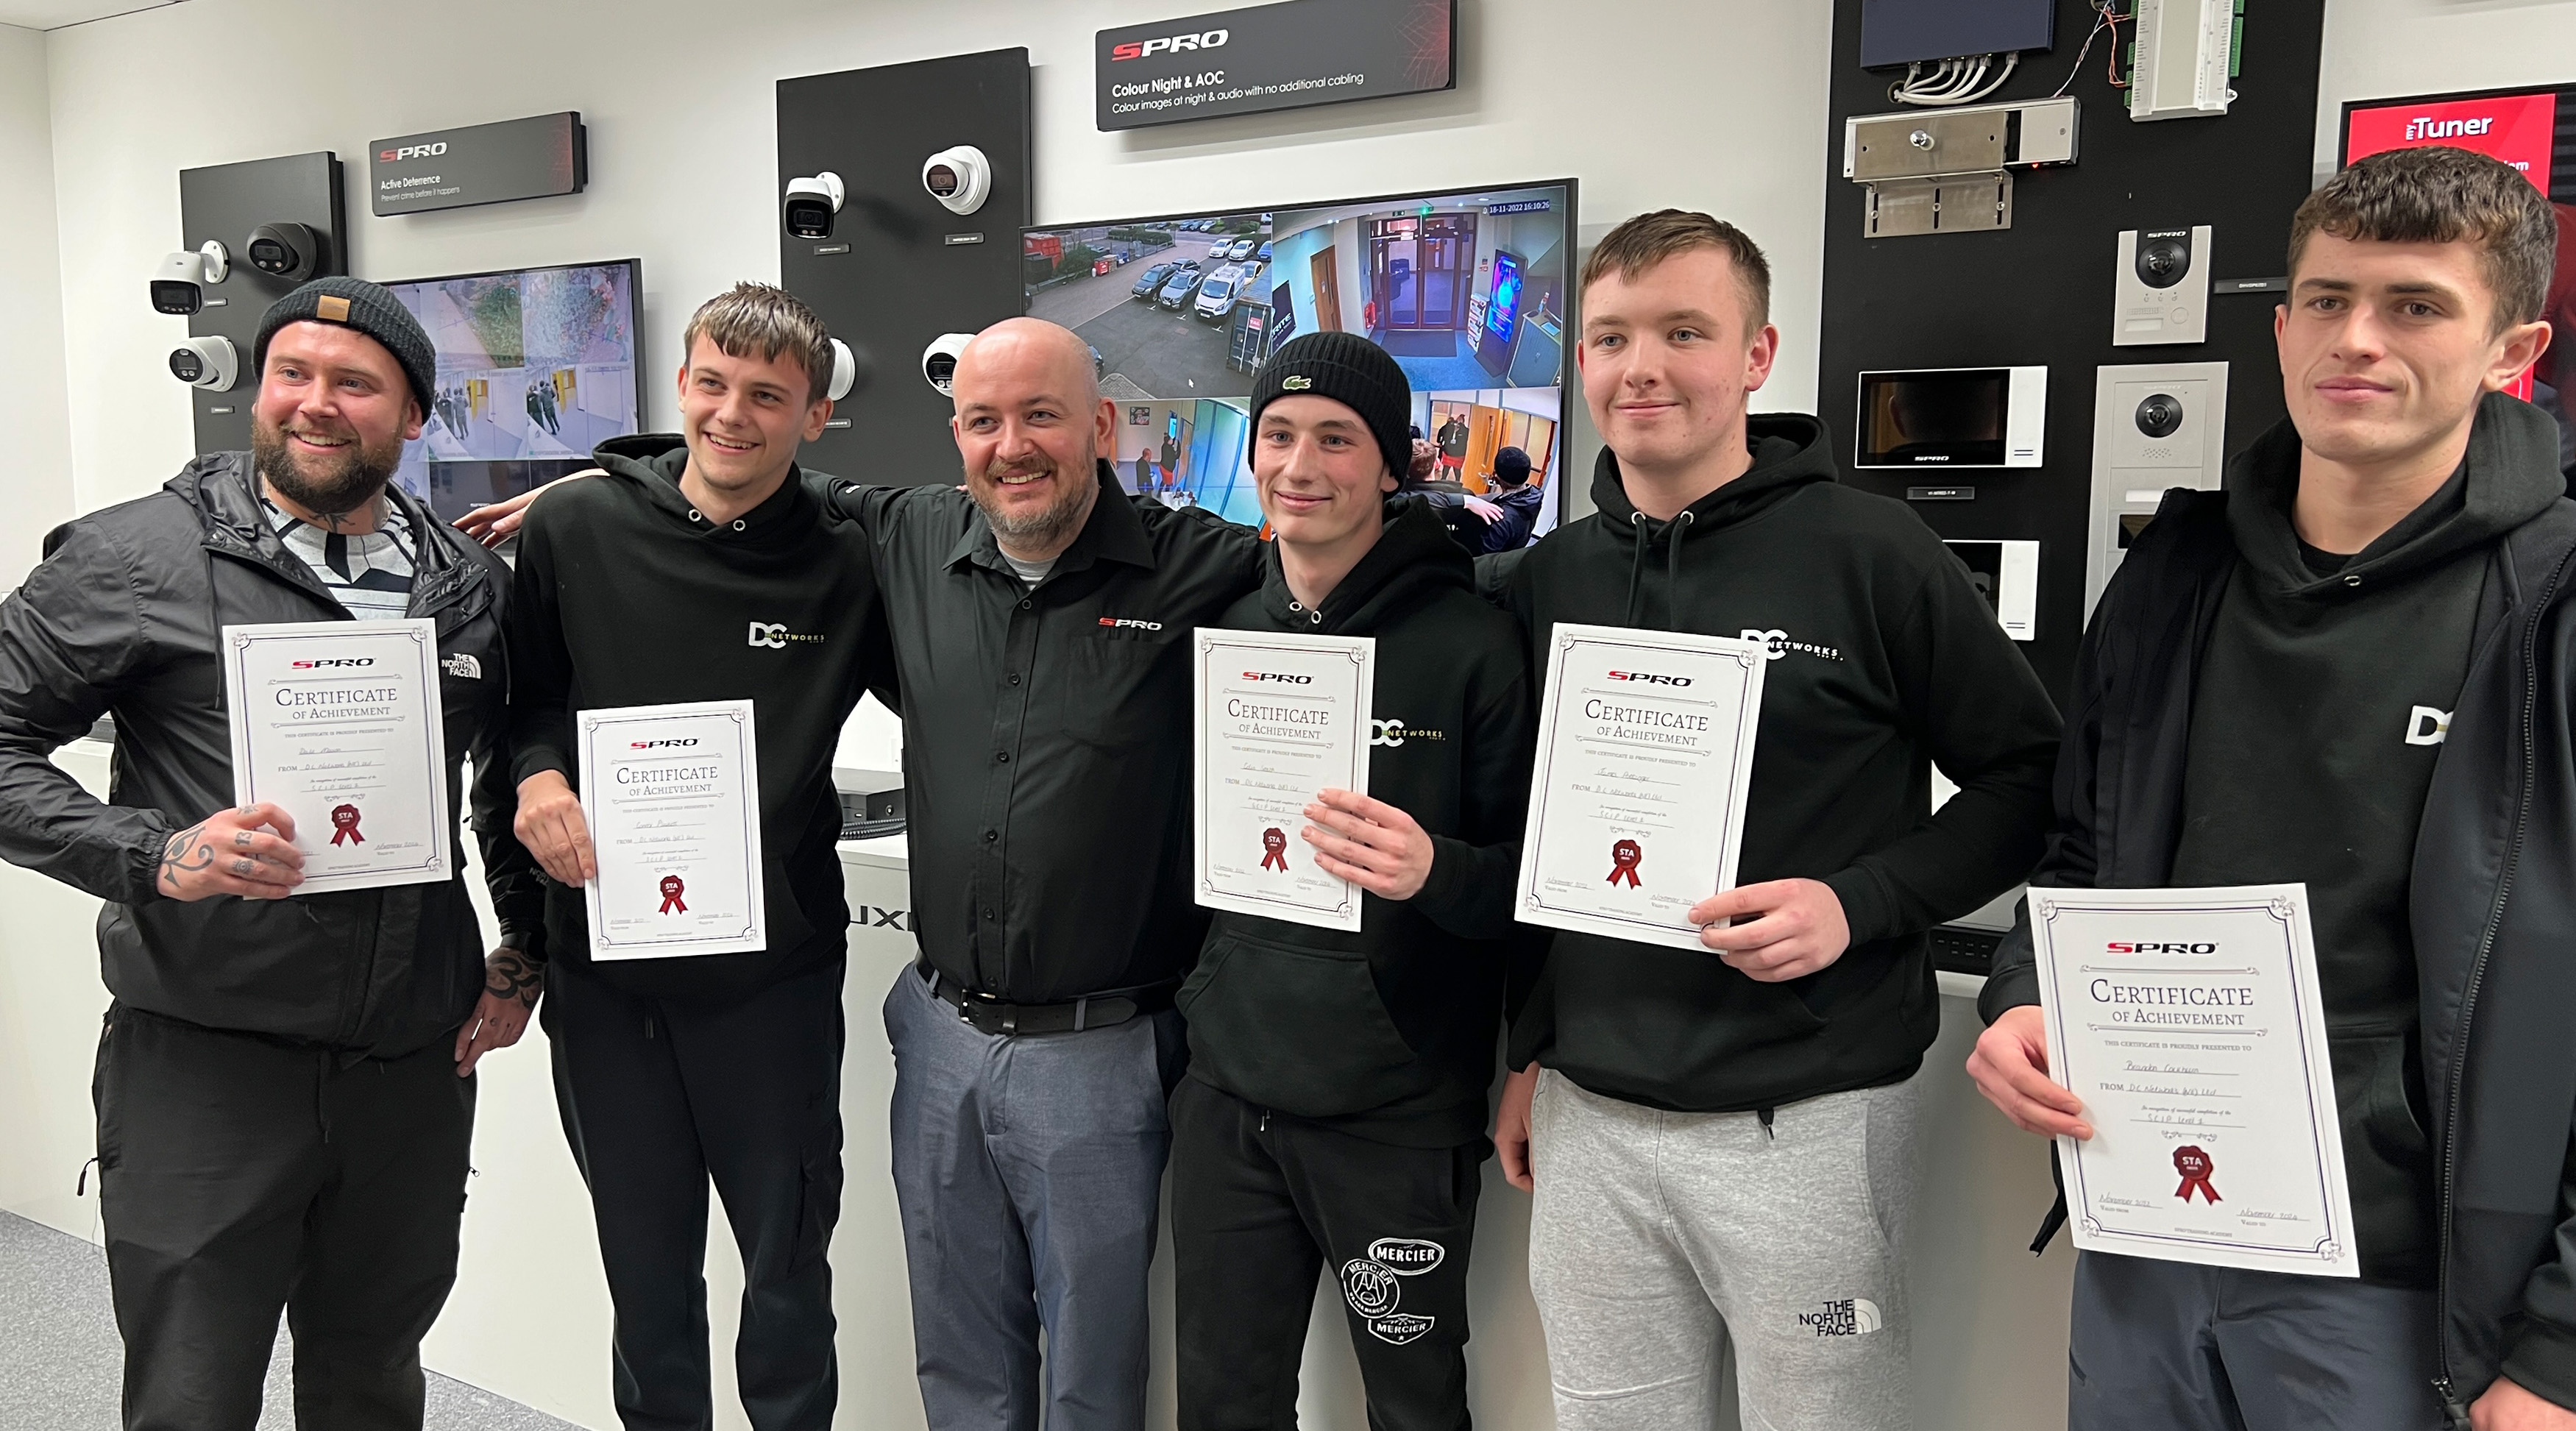 Our latest training day – all installers passed with flying colours!